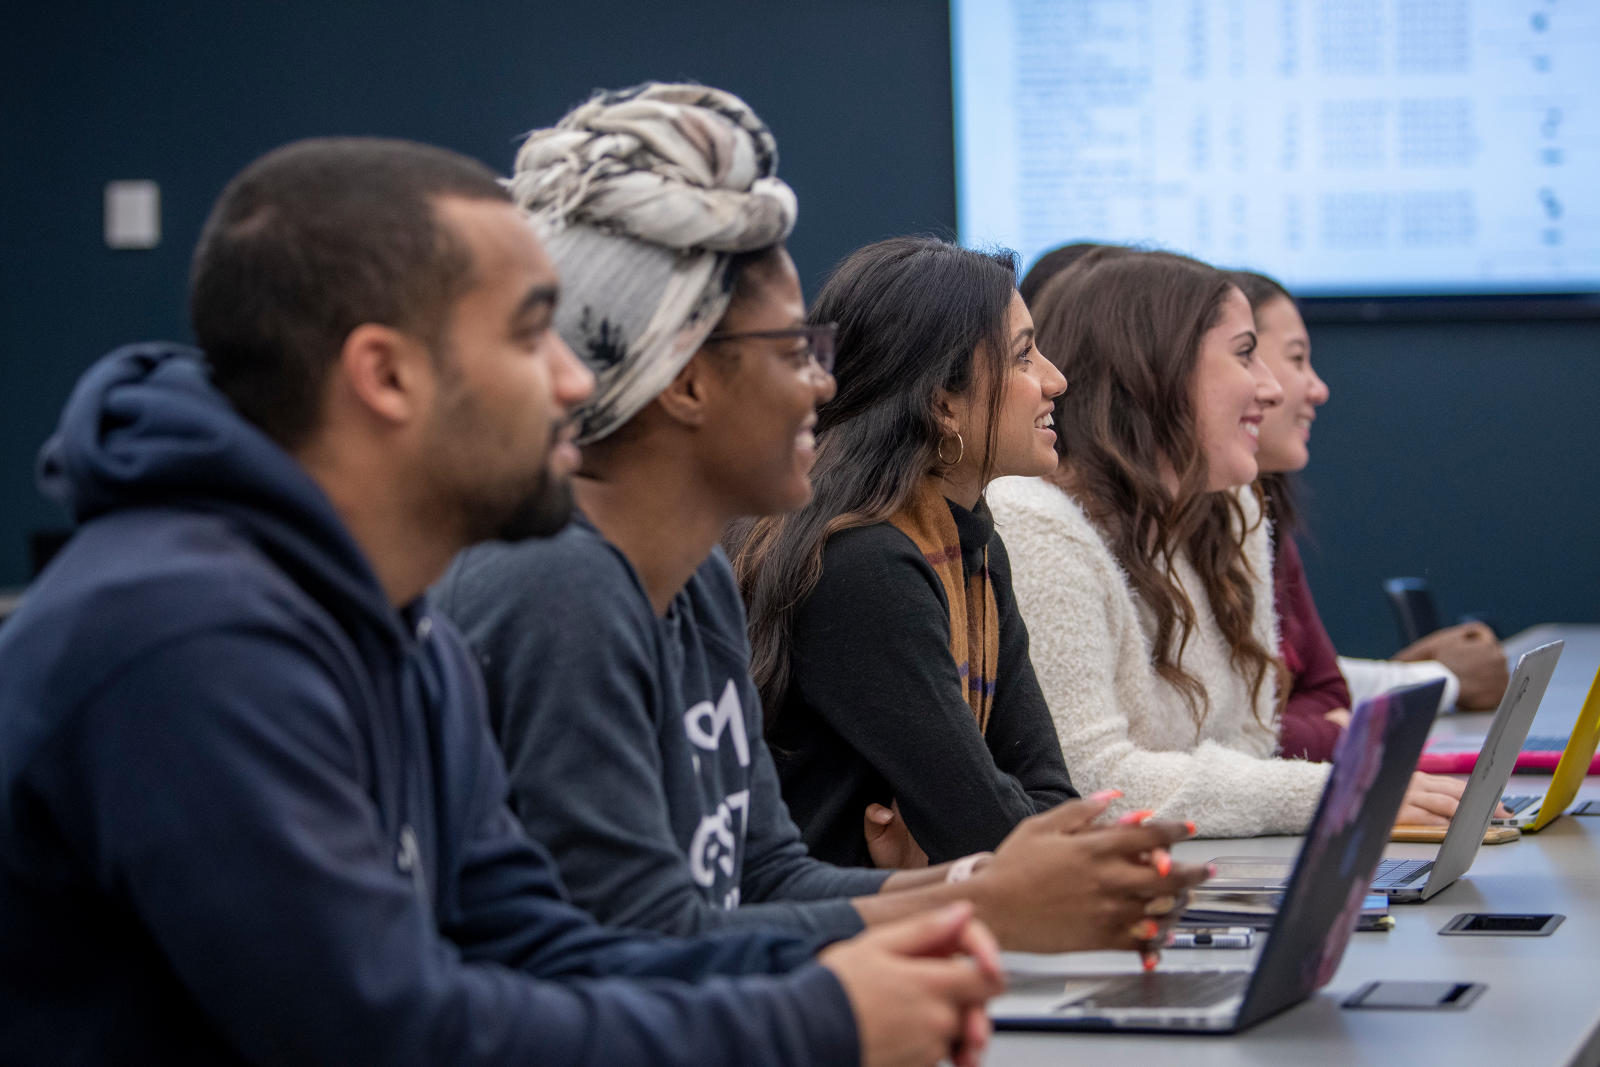 UConn students in class at Stamford campus